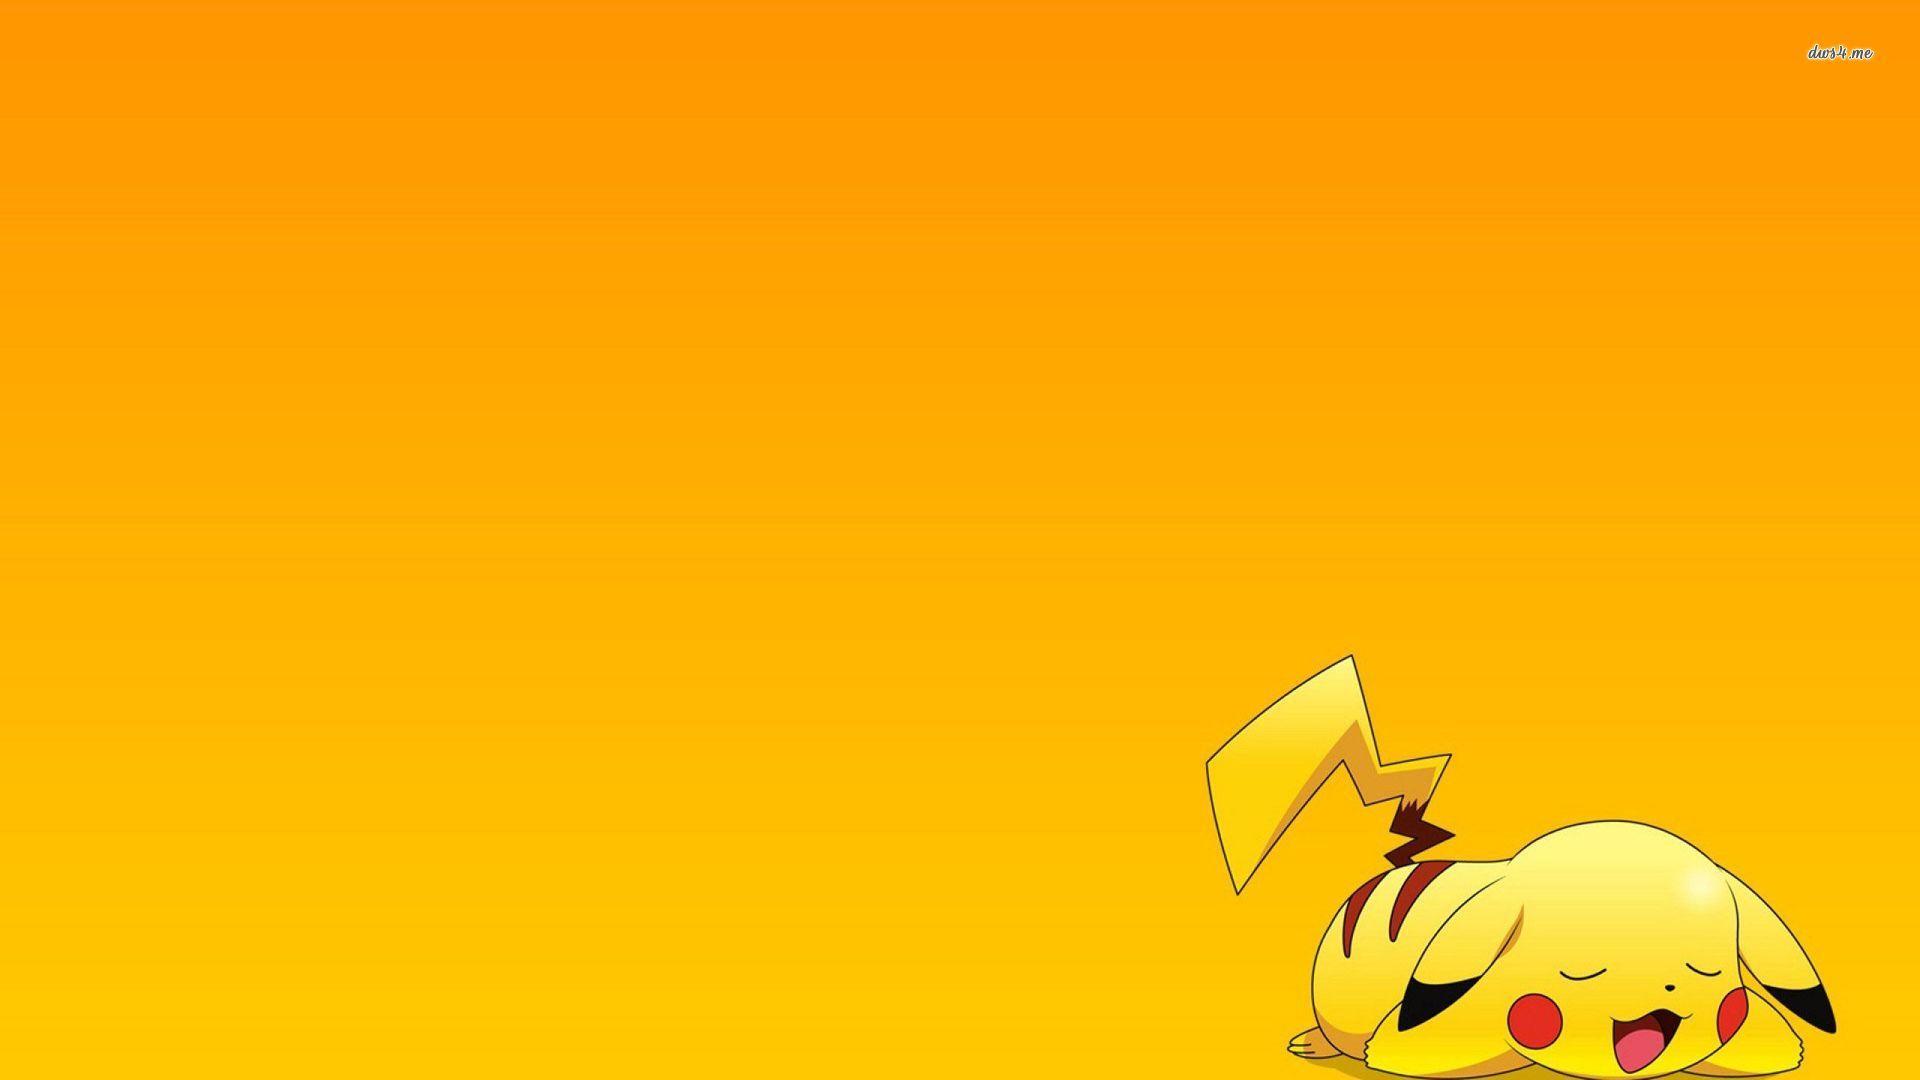 Pokemon wallpaper by request (High Quality)